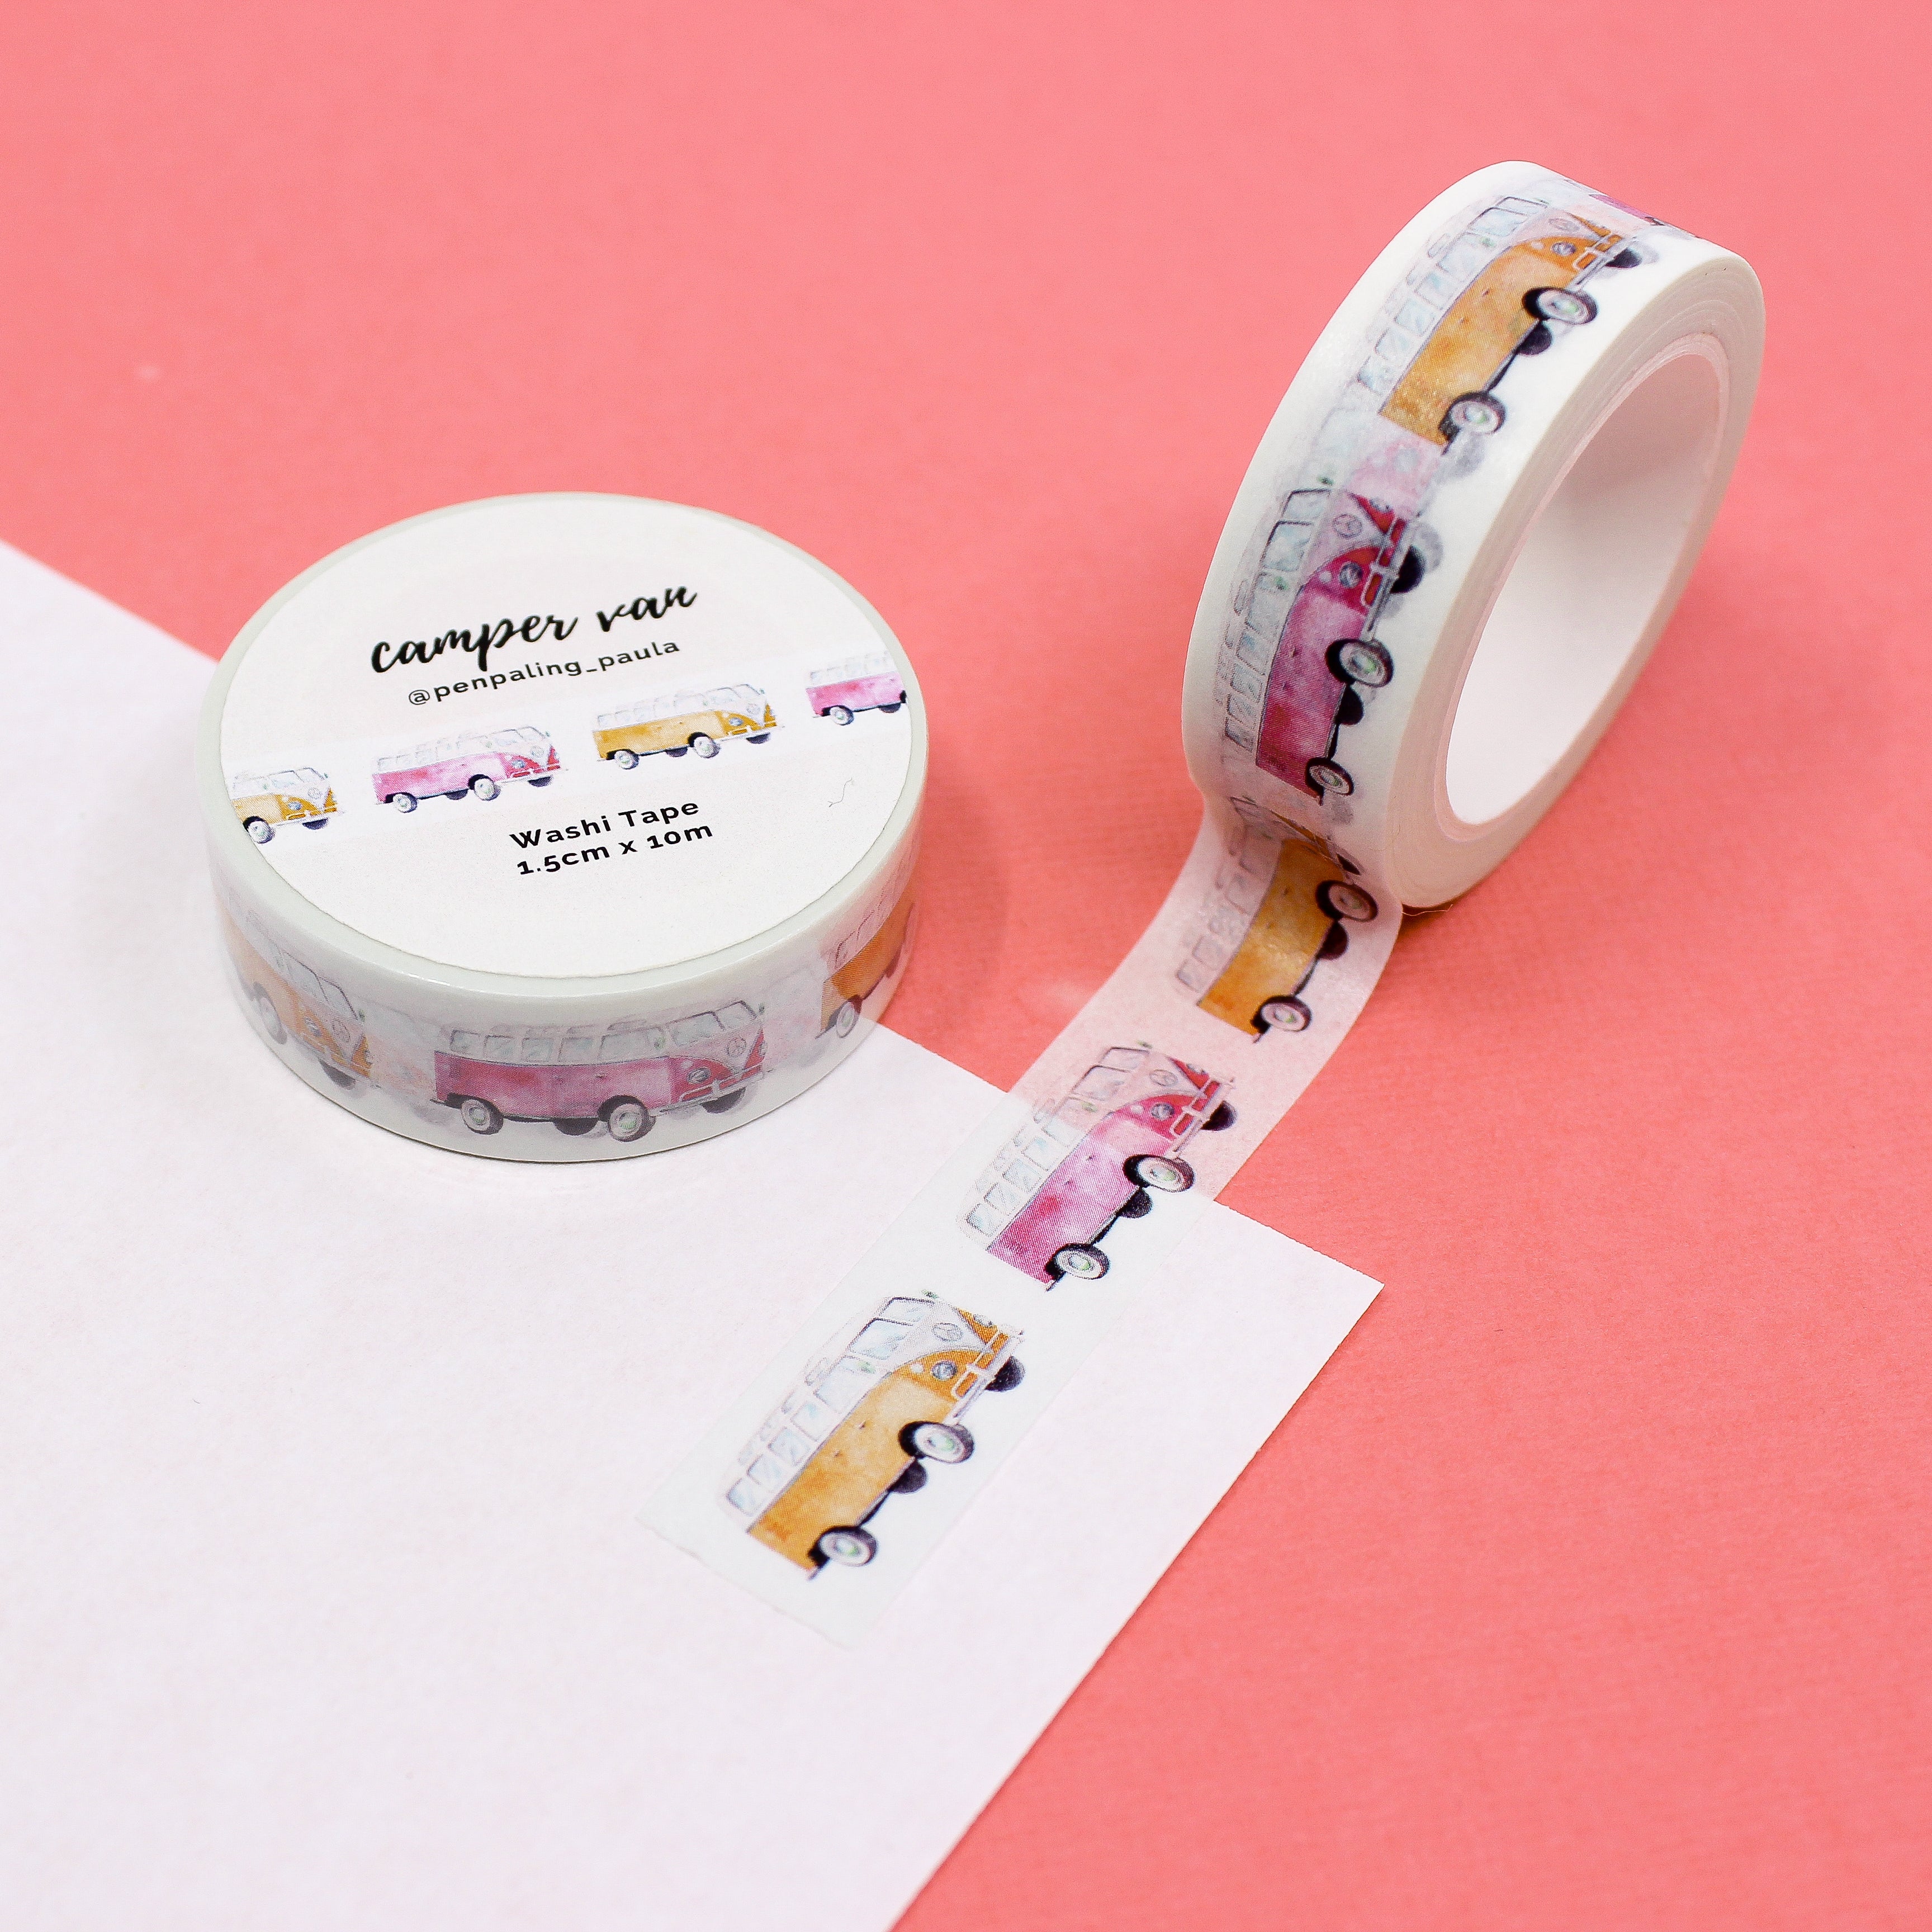 This is an orange and pink camper van themed washi tape from BBB Supplies Craft Shop